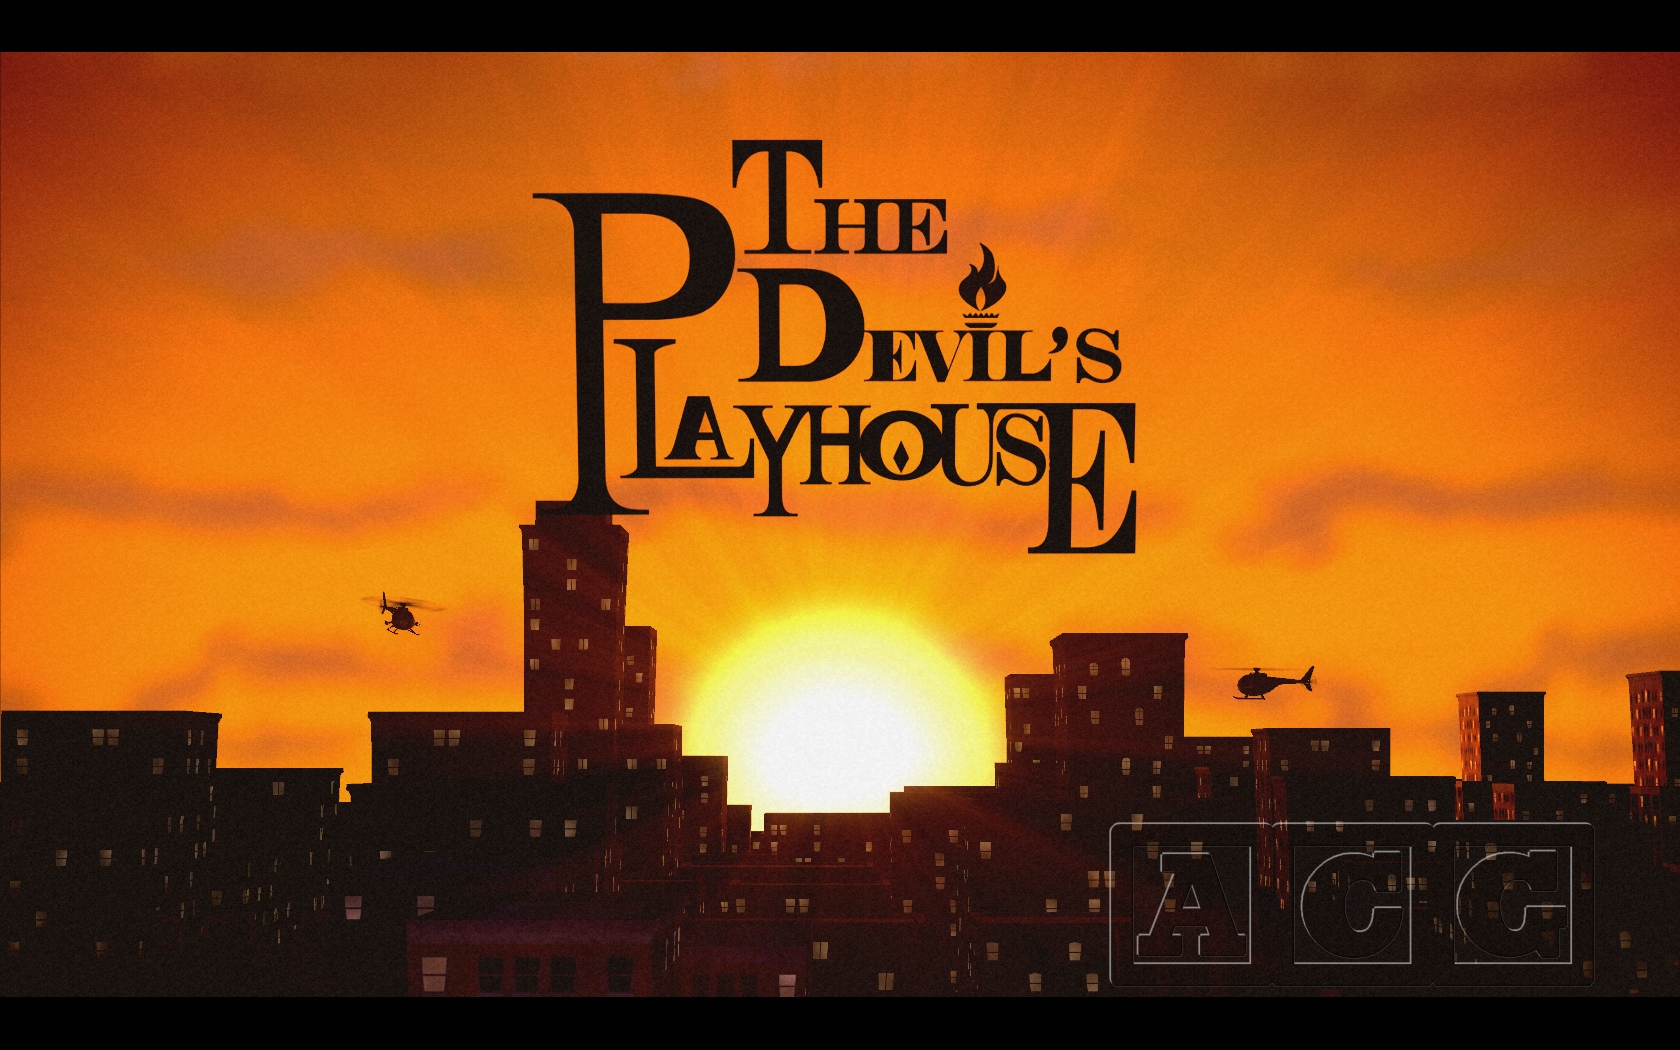 Sam & Max The Devil's Playhouse Episode 305: The City That Dares Not Sleep